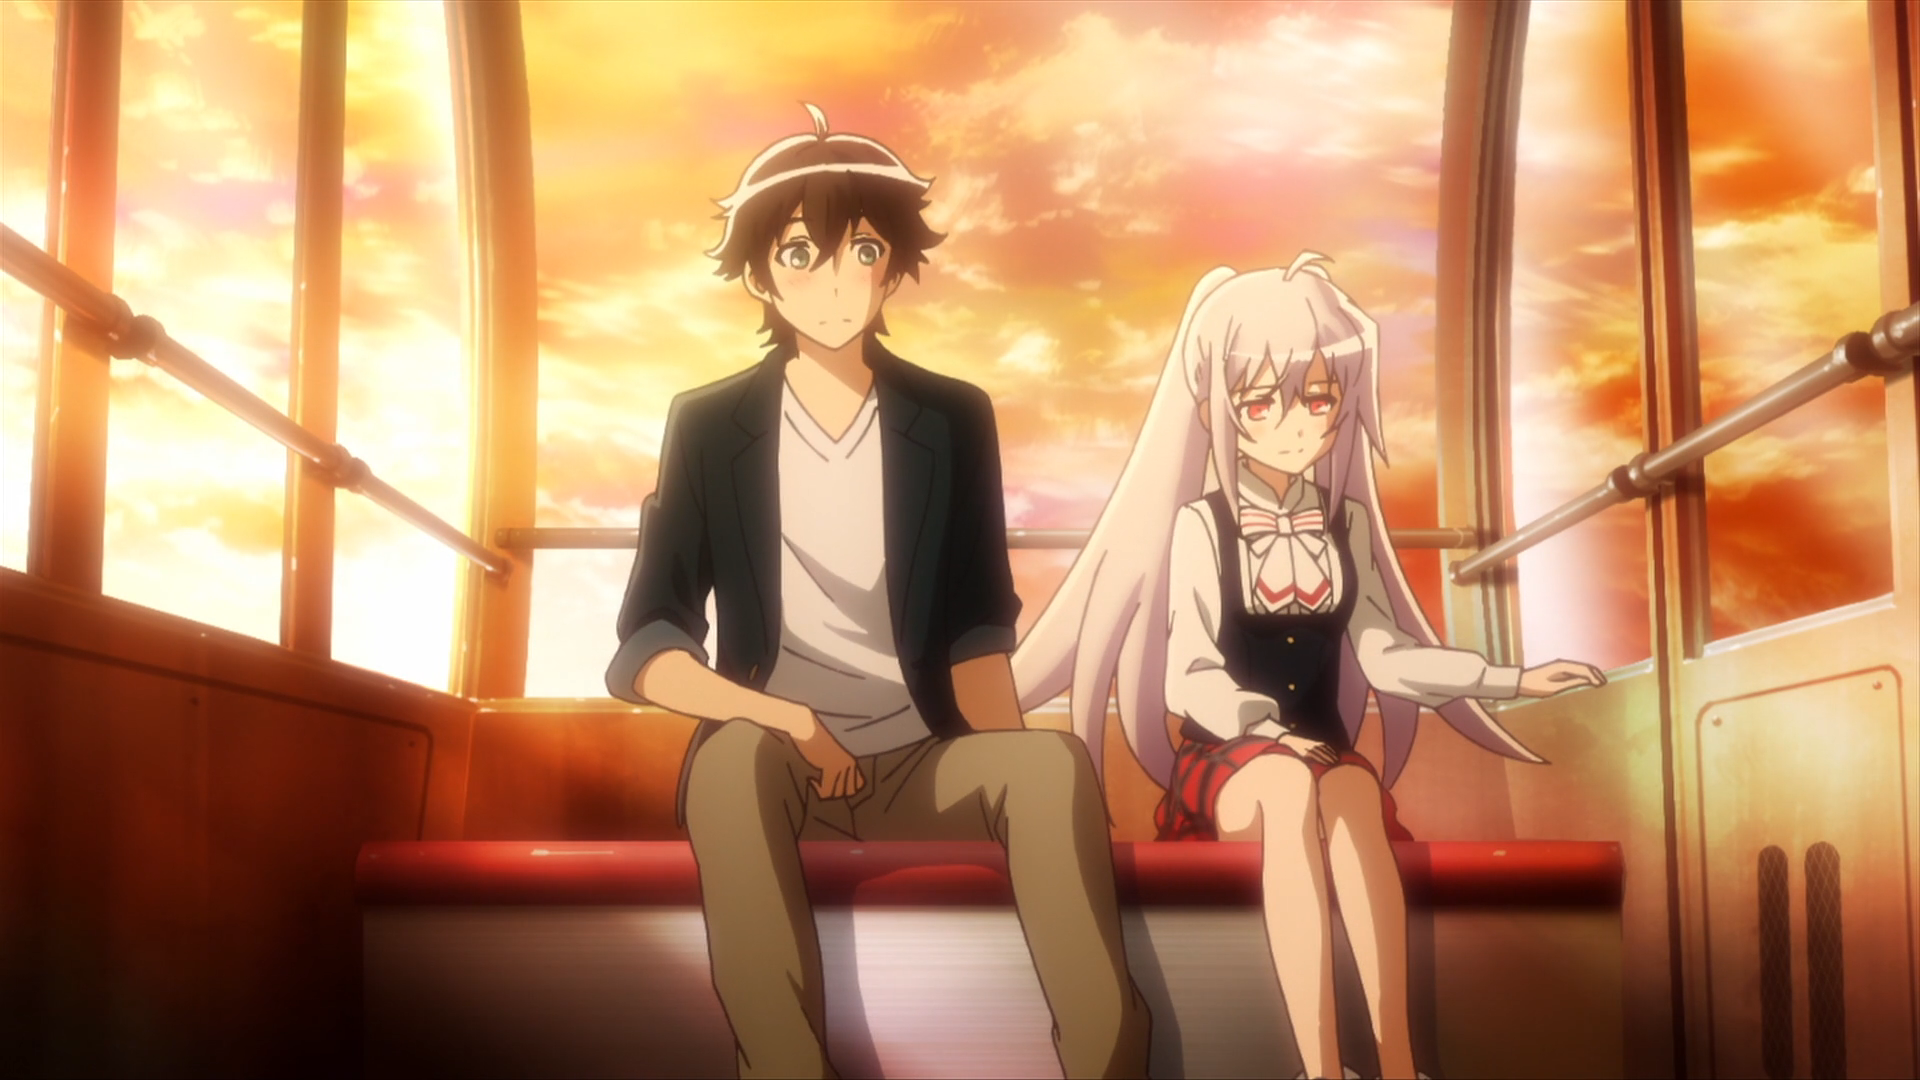 Plastic Memories I Hope One Day You'll be Reunited - Watch on Crunchyroll